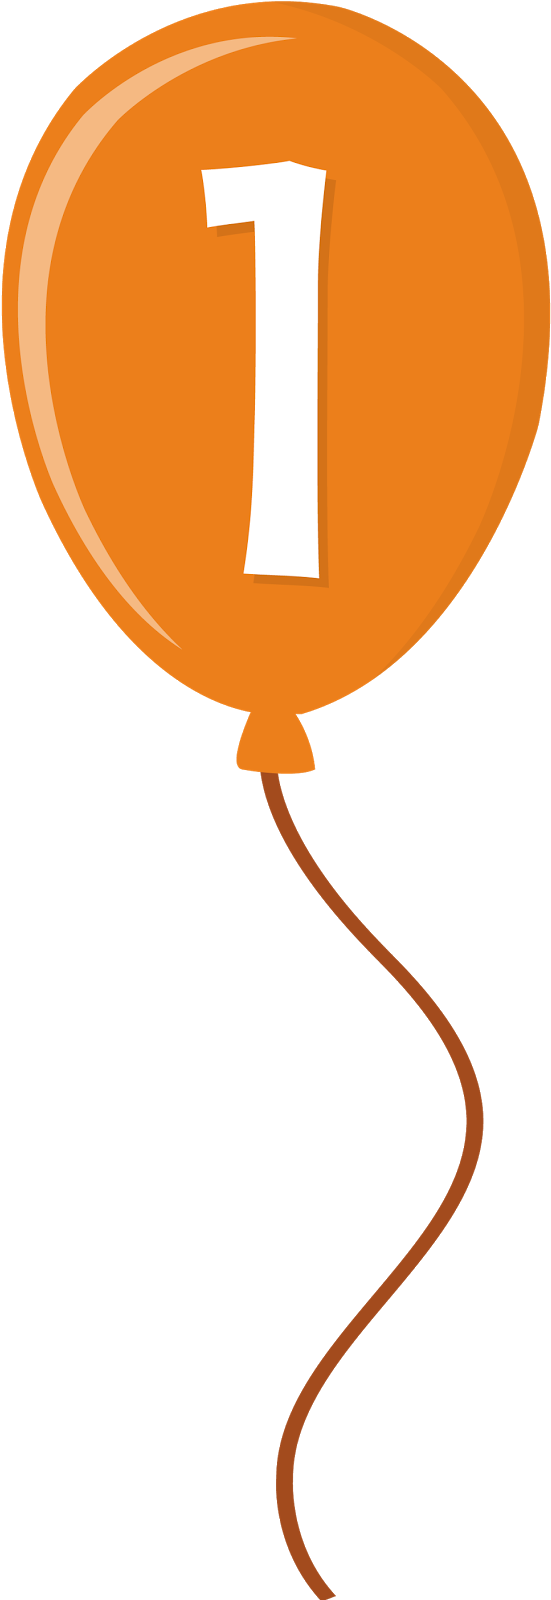 Orange Clipart Baloon - Balloon With Number 1 Clipart (638x1600)